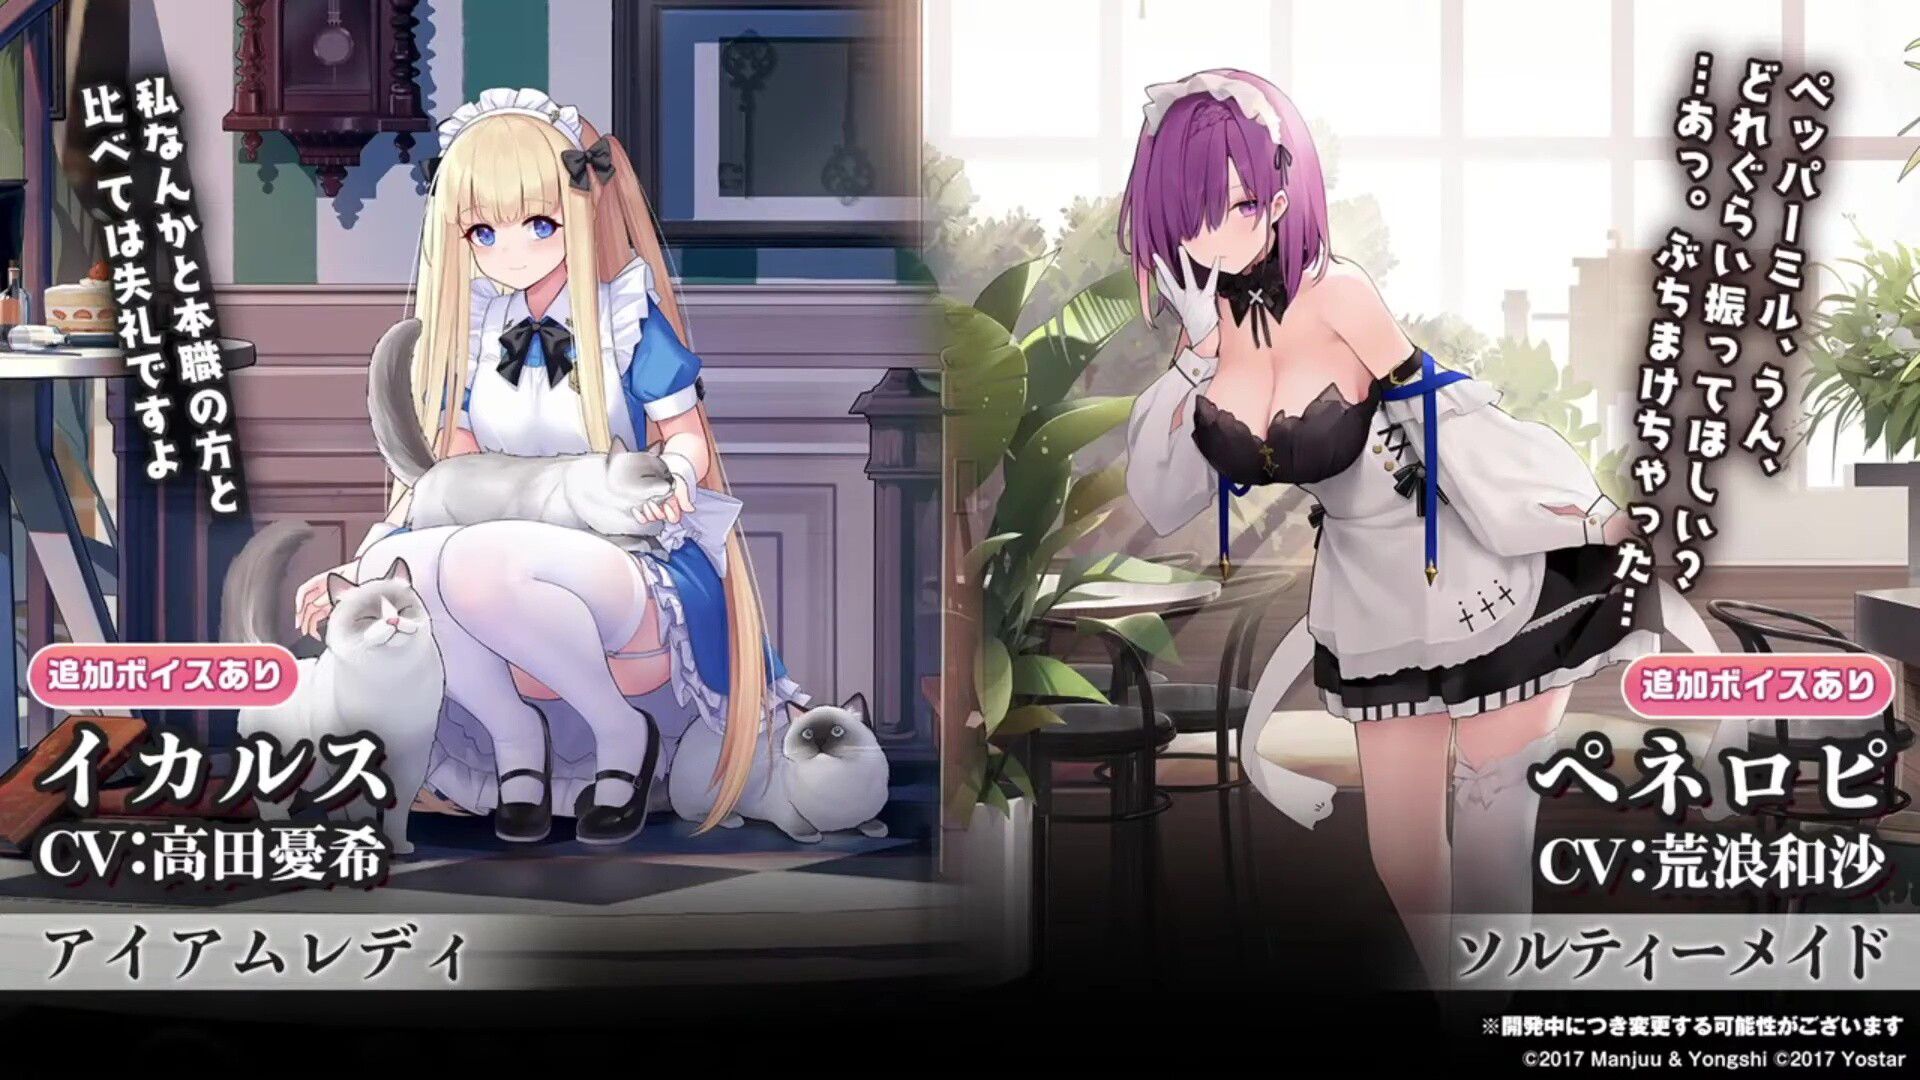 Erotic costumes such as "Azur Lane" erotic new character, whipmuchiro Santa and whipmuchi erotic maid clothes 22